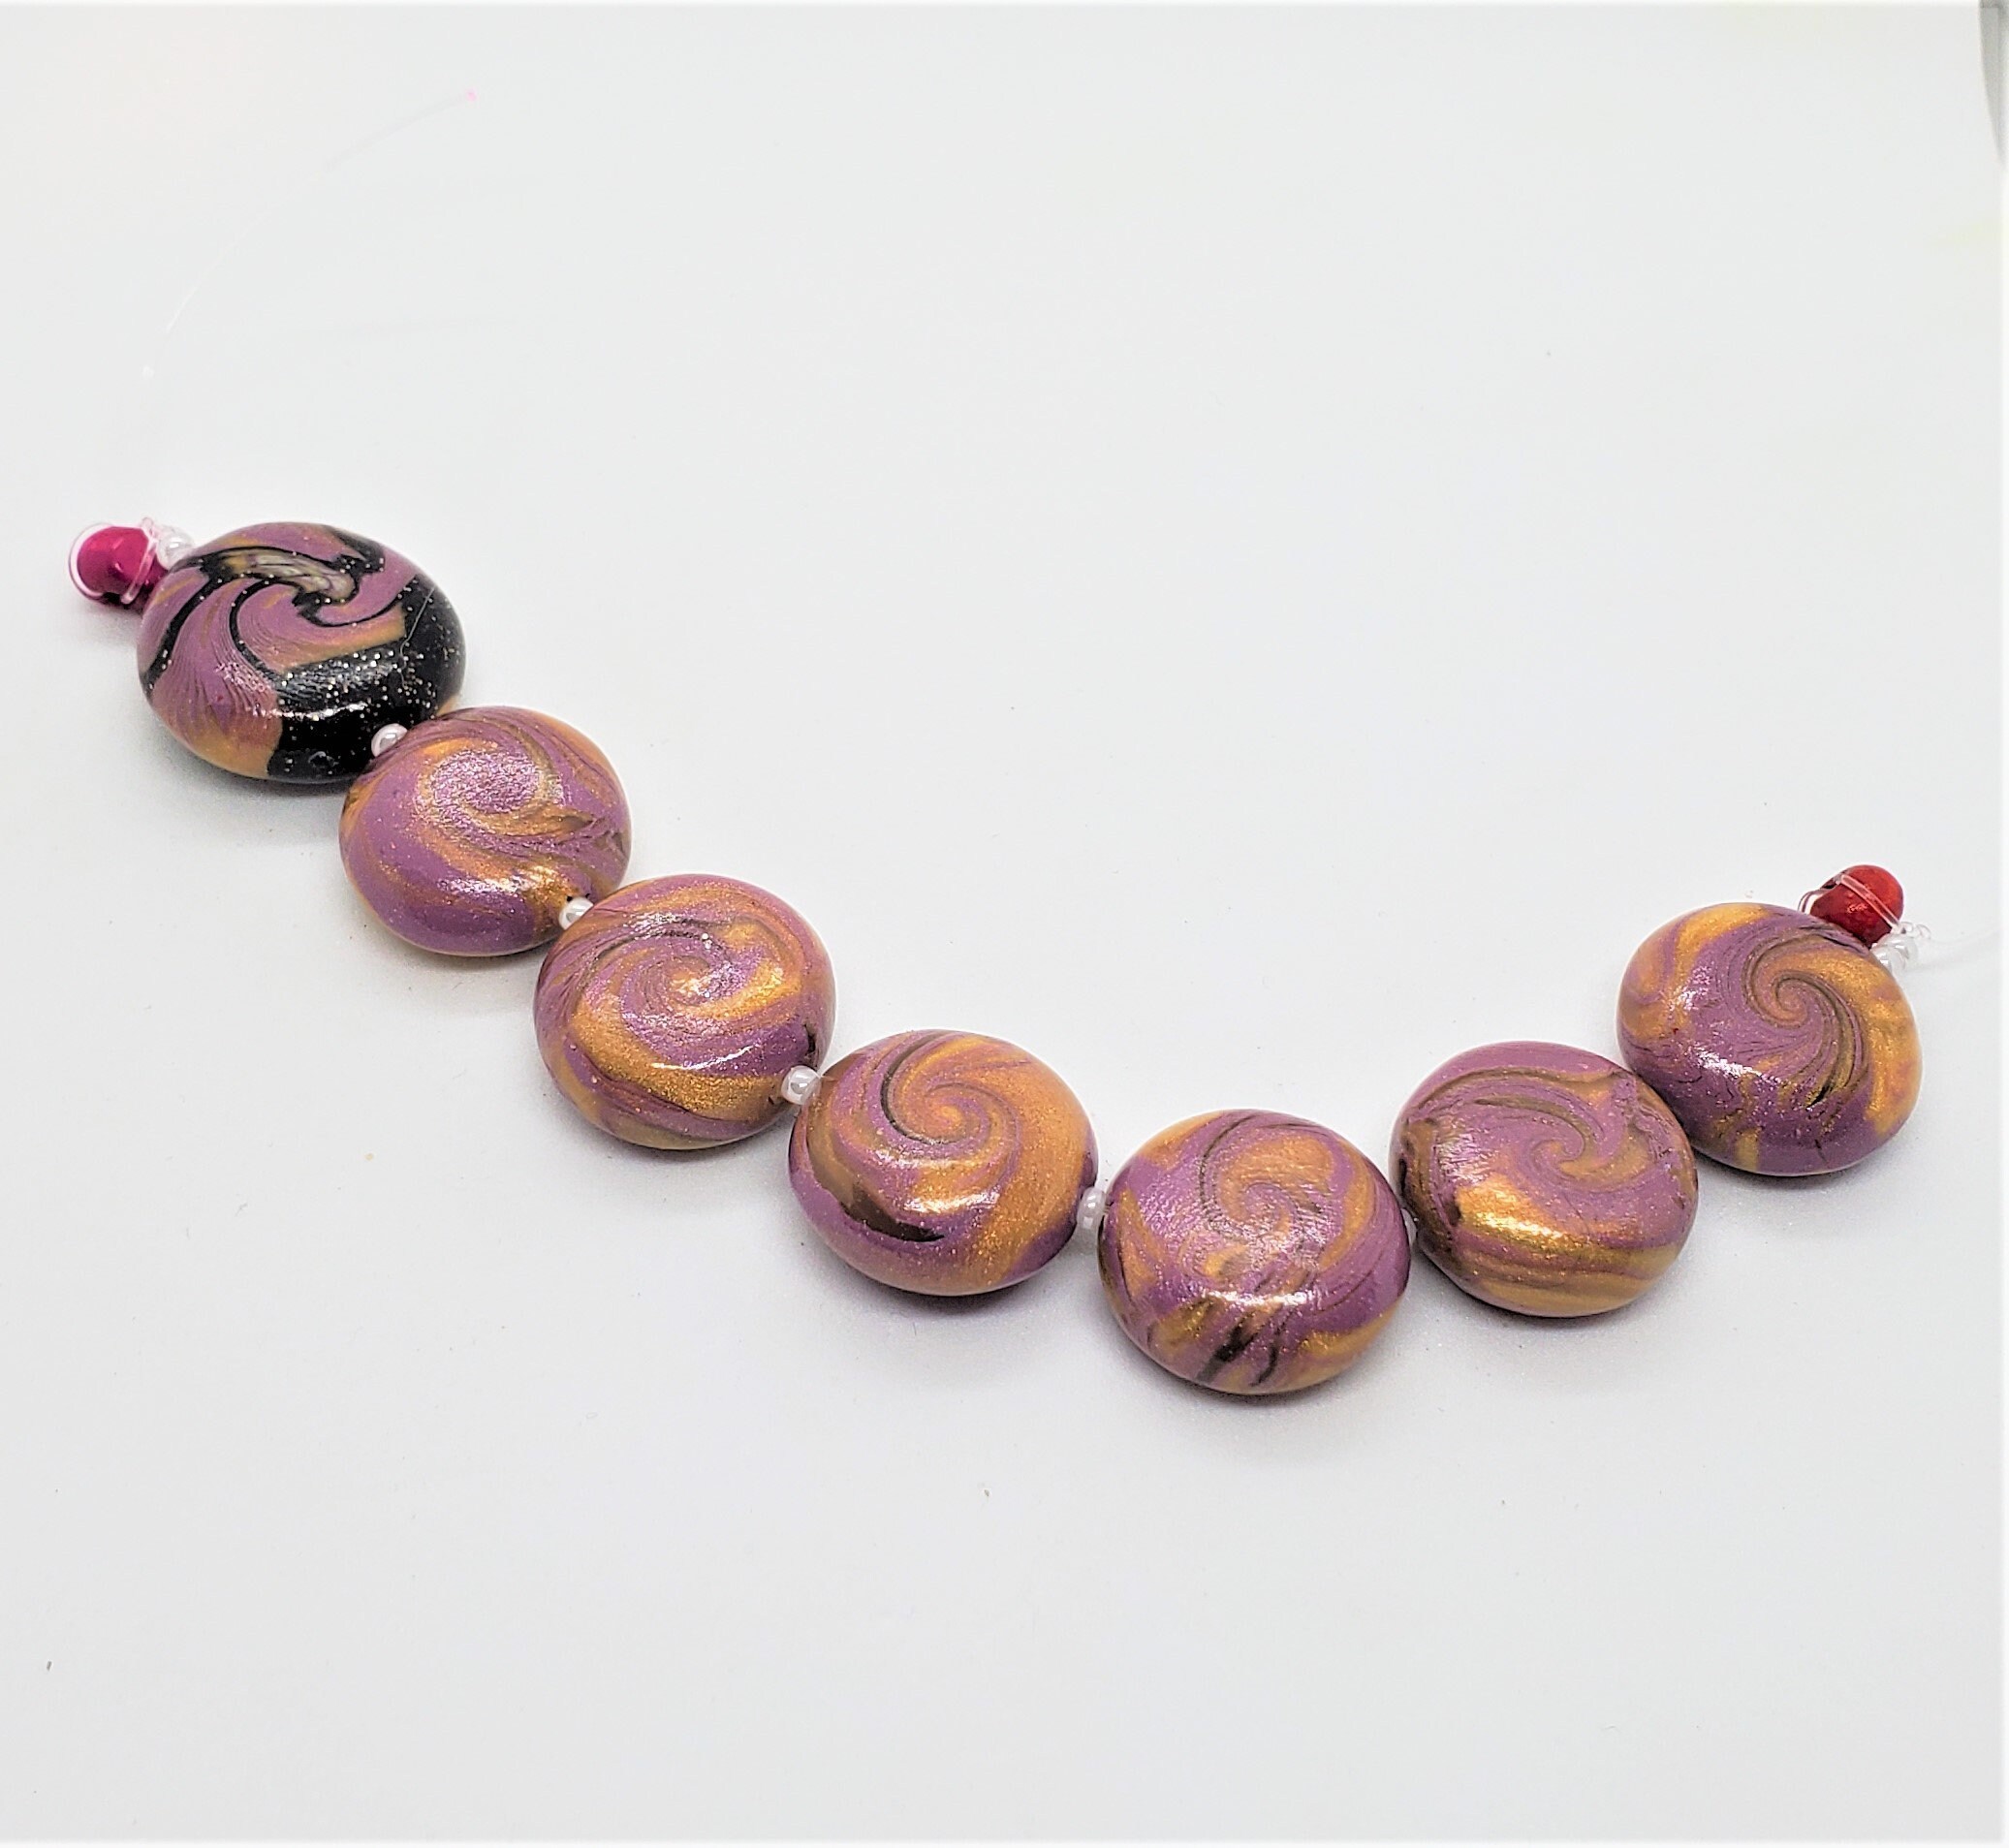 Elegant Purple Glass Beads for Jewelry Making, 8mm Polished Round Beads for  Necklace, Swirl Beads, Purple Marble Beads